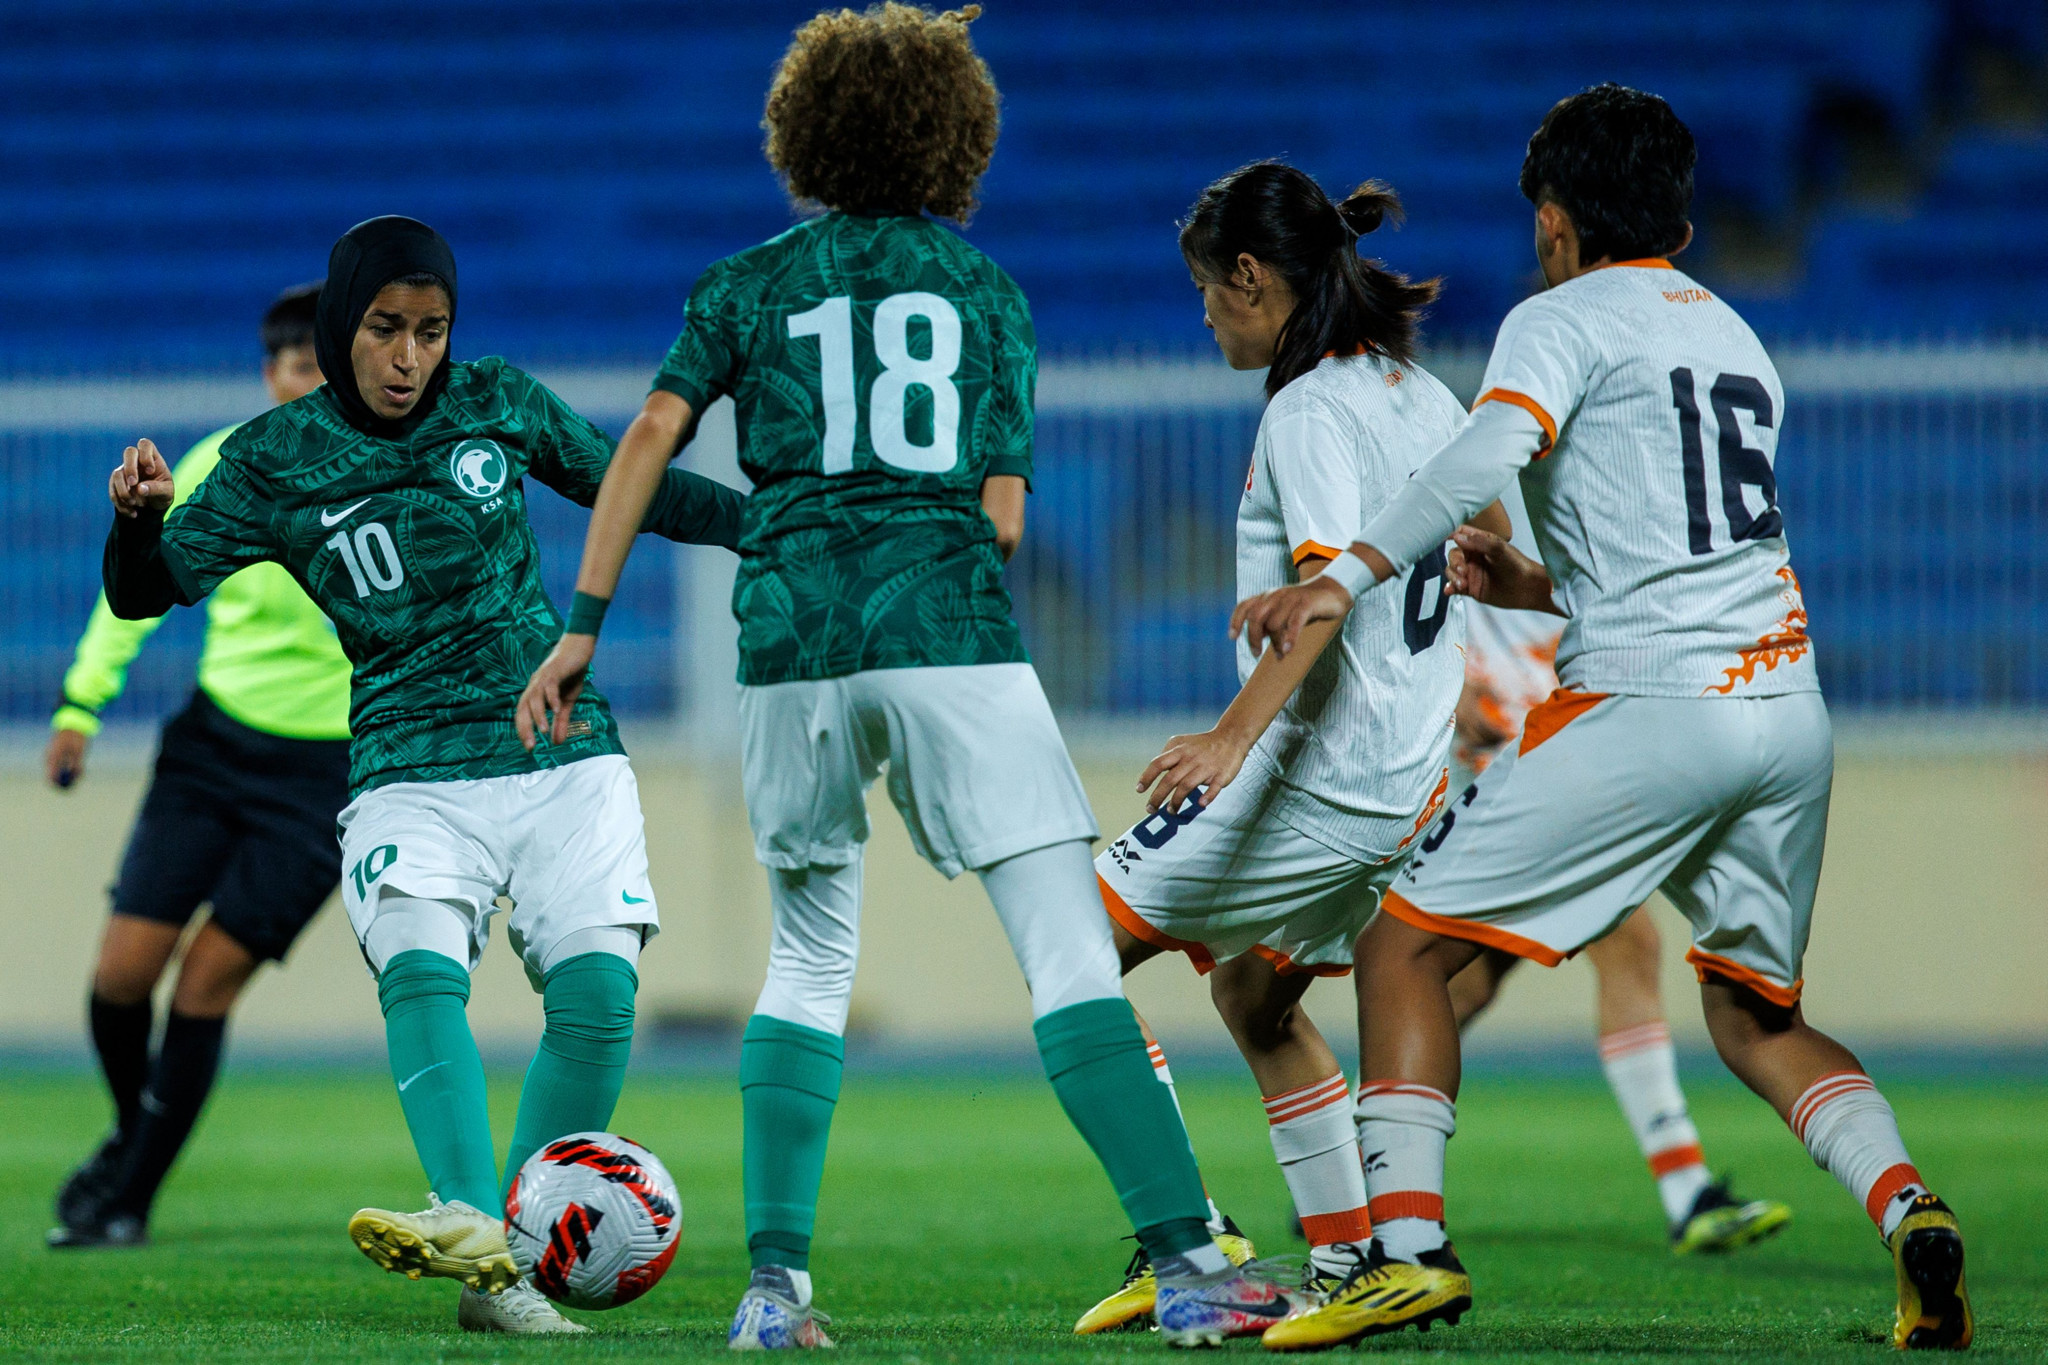 Saudi Arabia's women's team only started playing international friendlies this year ©Getty Images